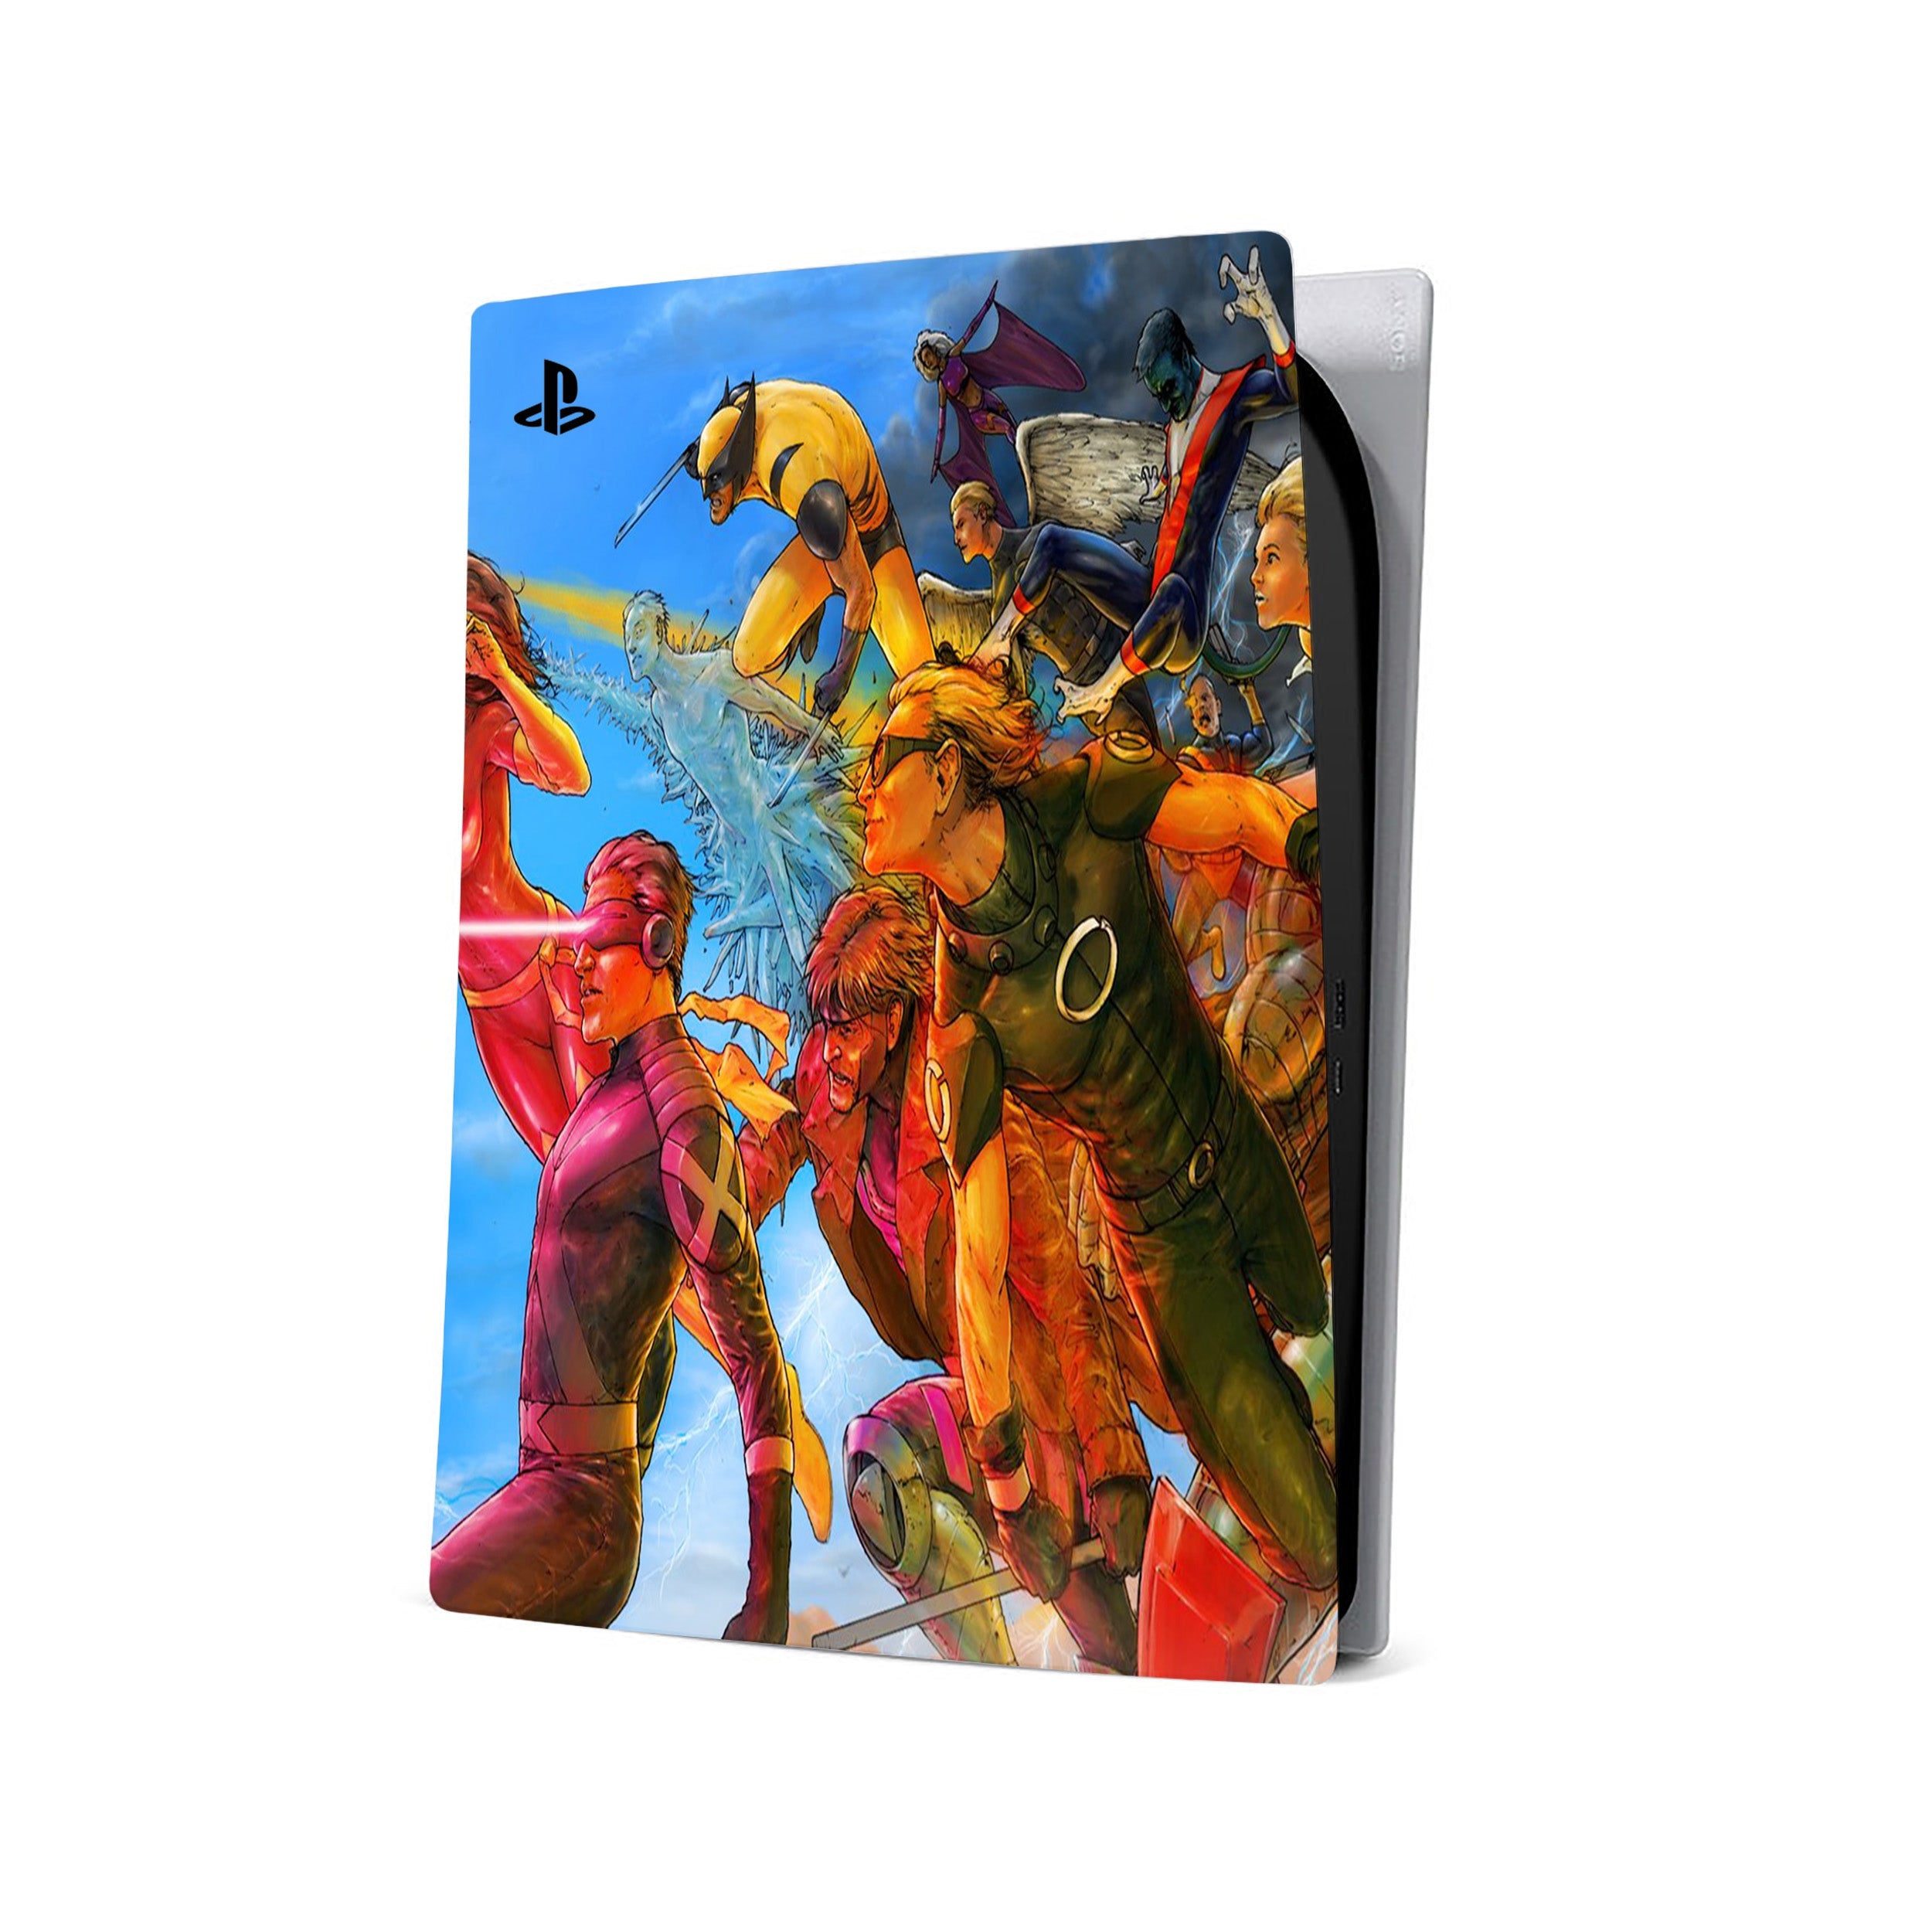 A video game skin featuring a Marvel X Men design for the PS5.